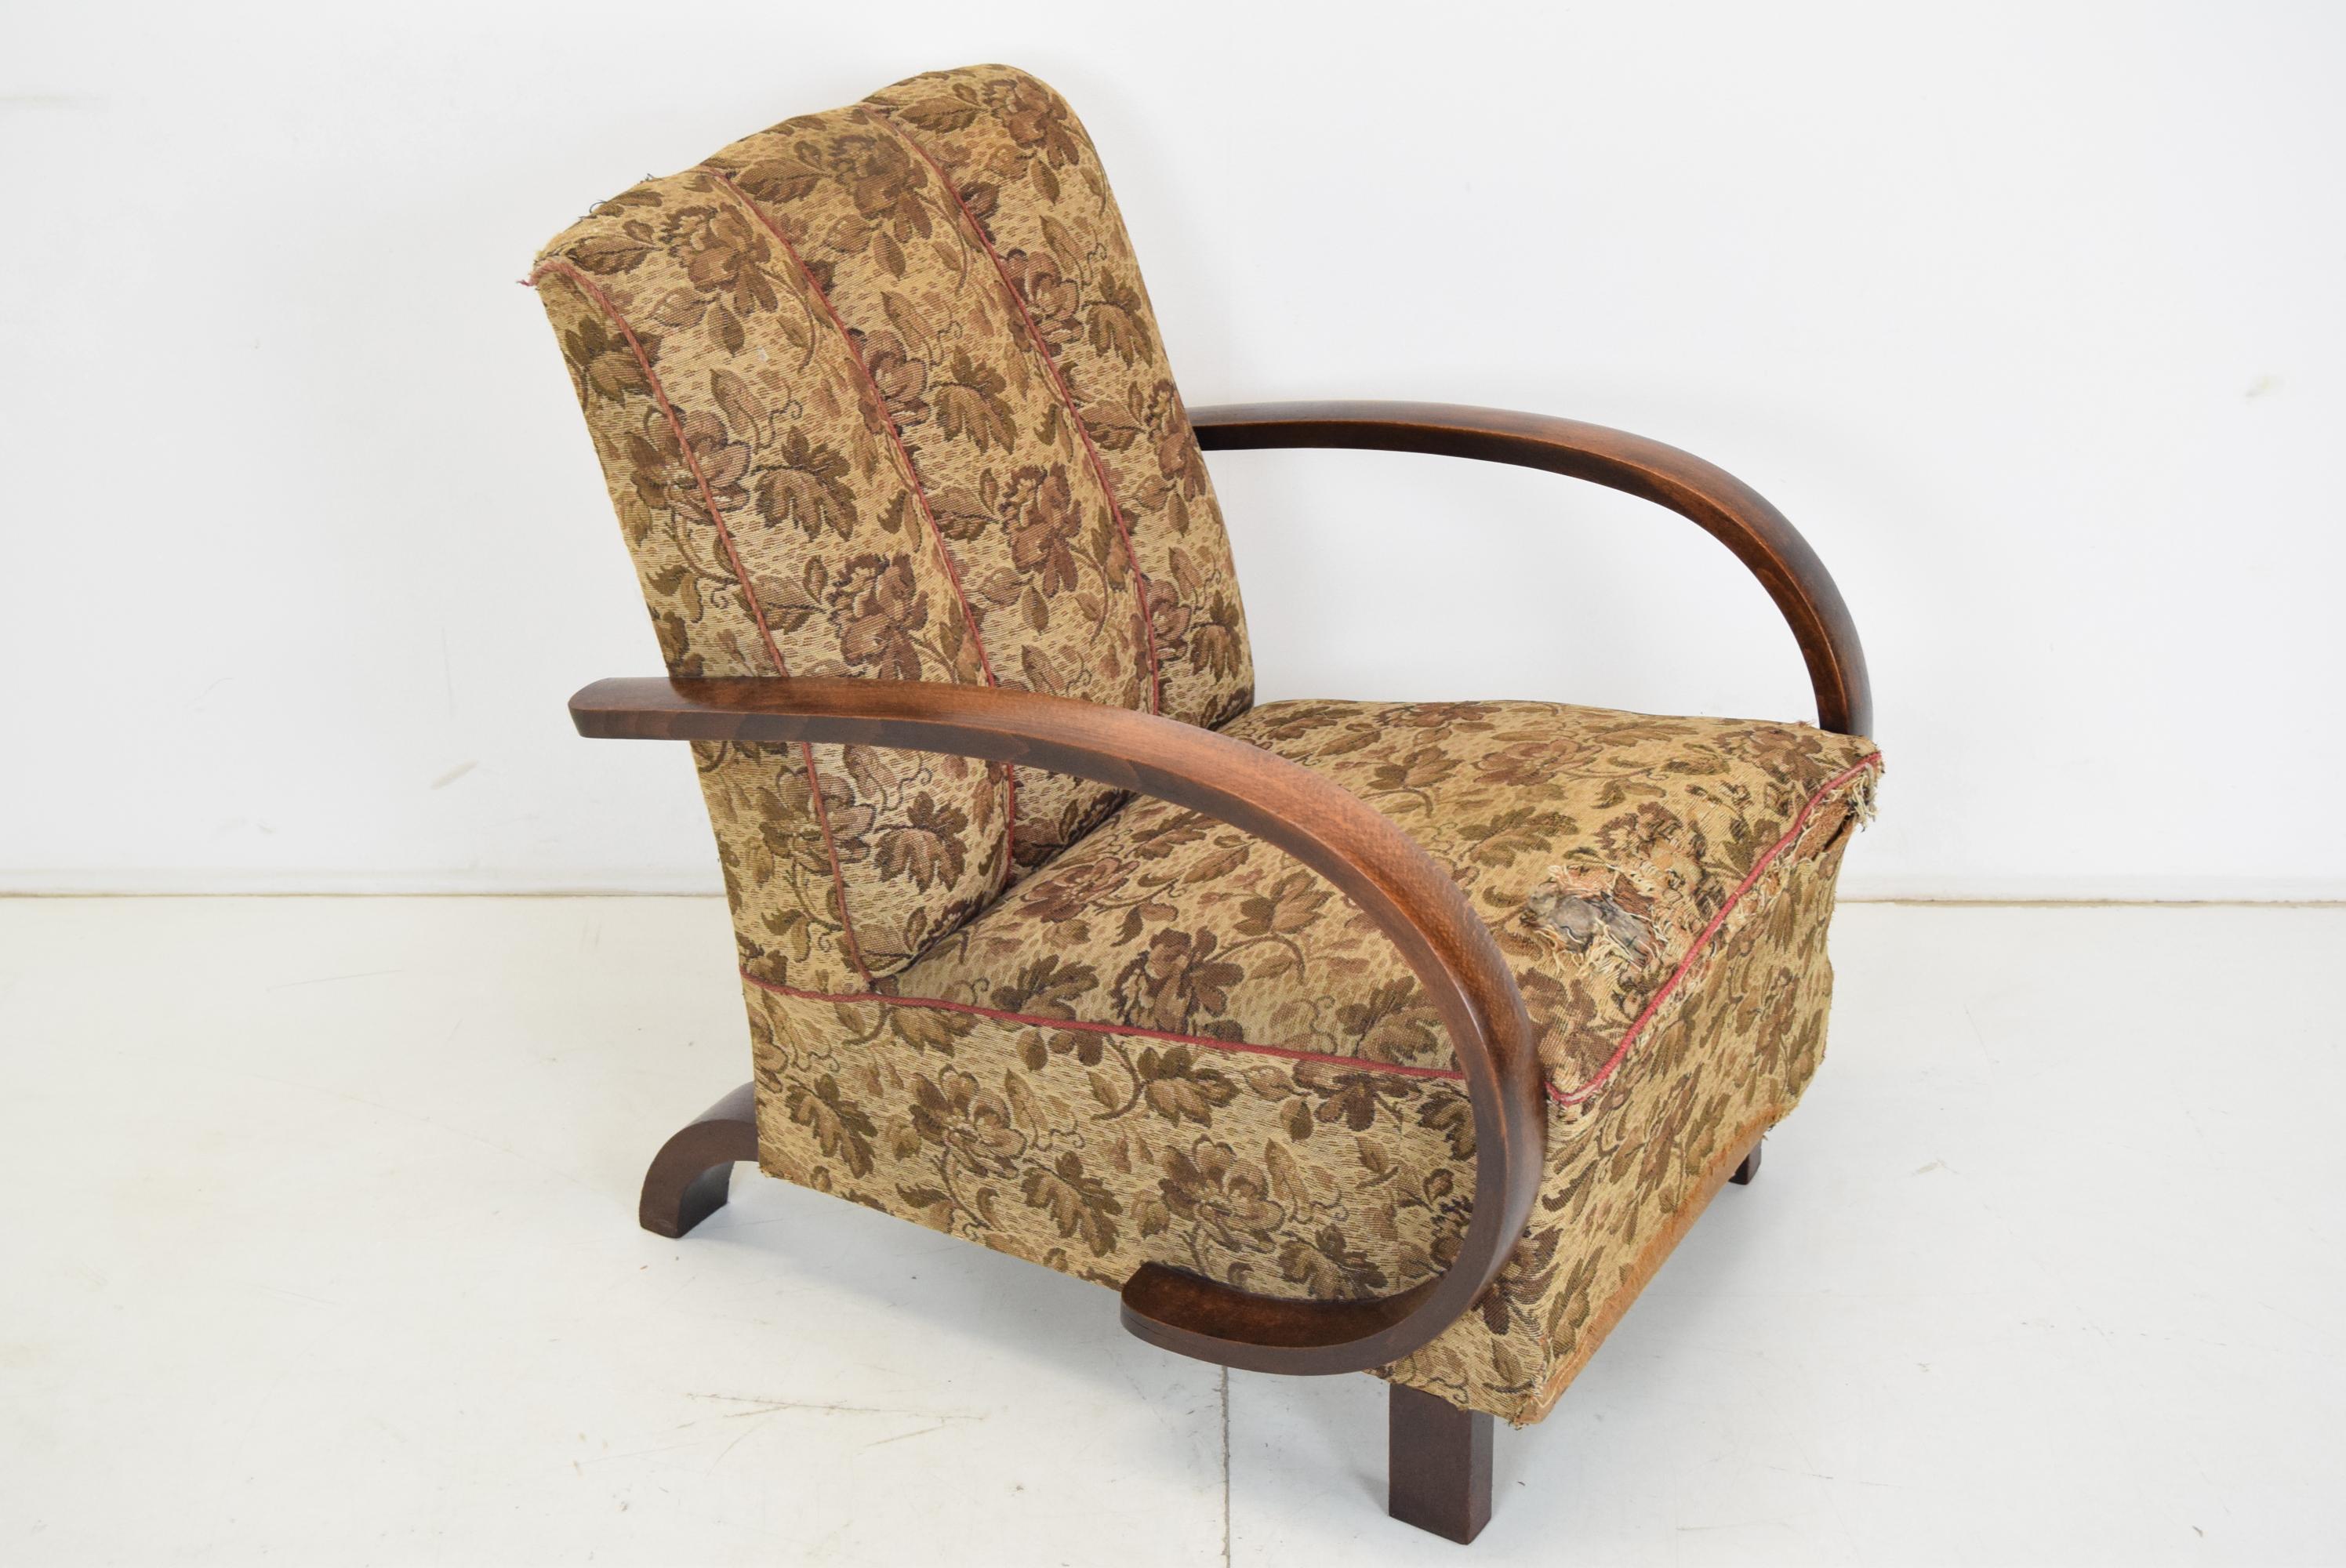 Made of wood, fabric.
The chair needs to be reupholstered.
Wood is good condition.
Original condition.
Rare piece.